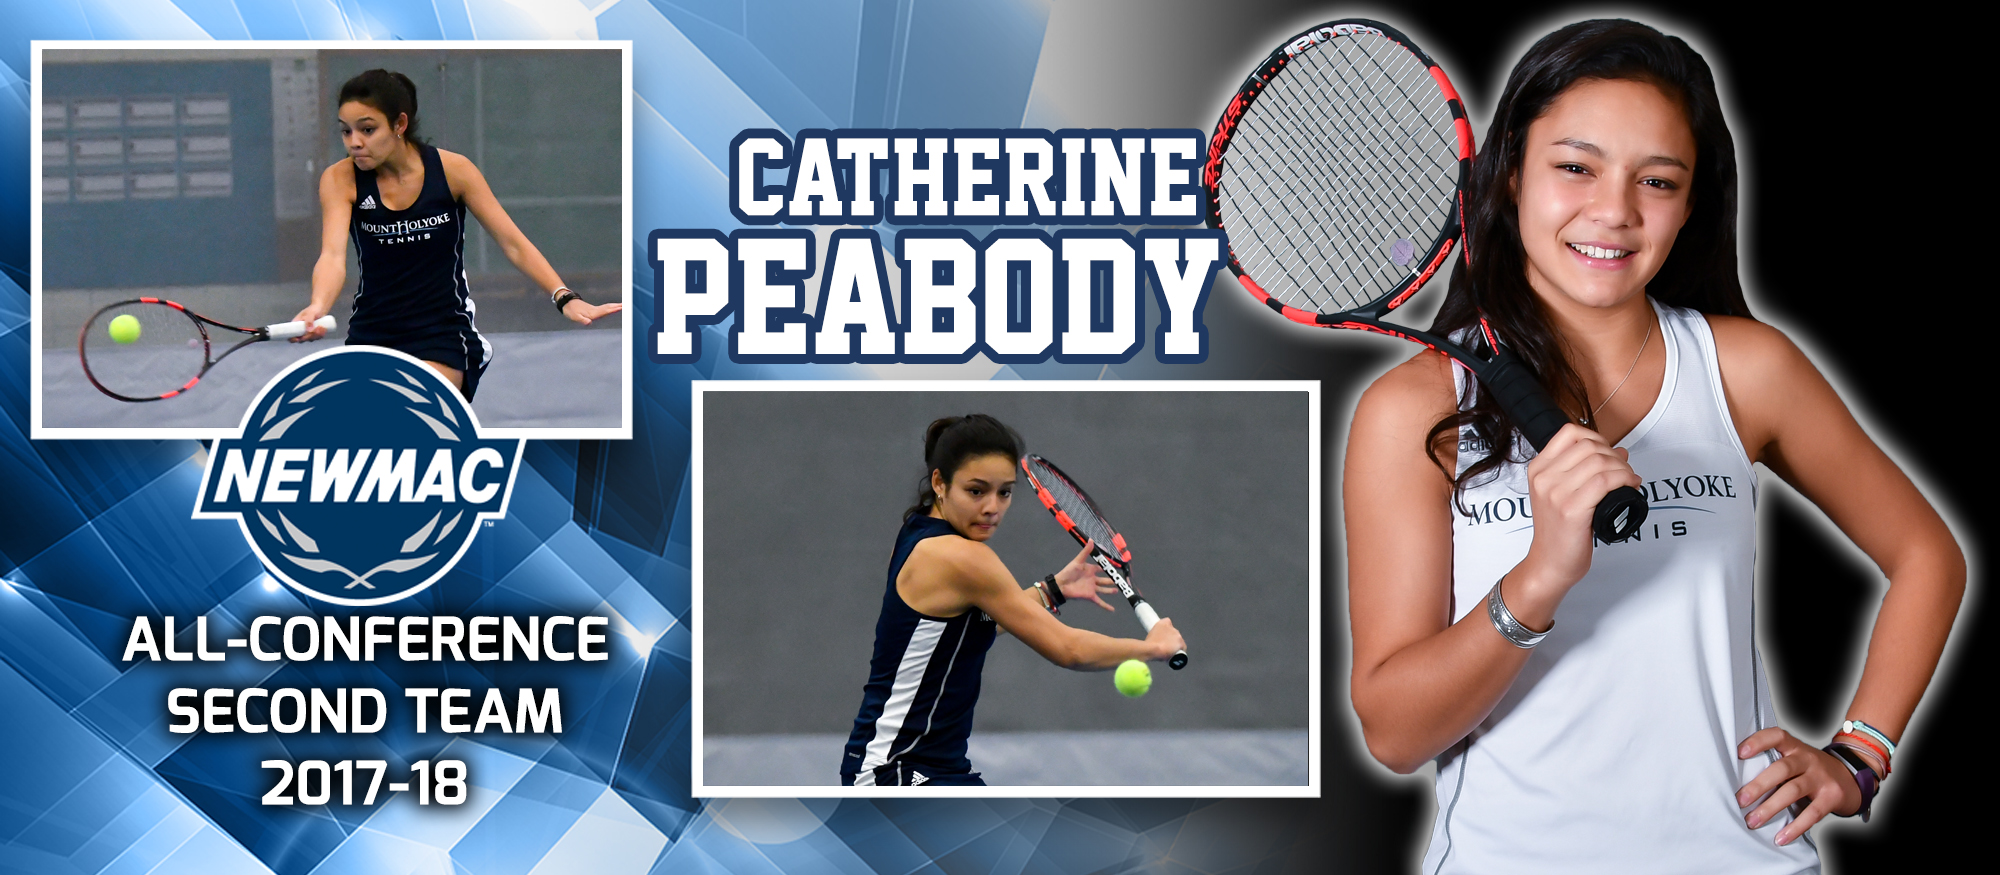 Graphic showing a variety of photos of Lyons tennis player, Catherine Peabody, who was named to the 2017-18 NEWMAC All-Conference Second Team in #3 Singles.